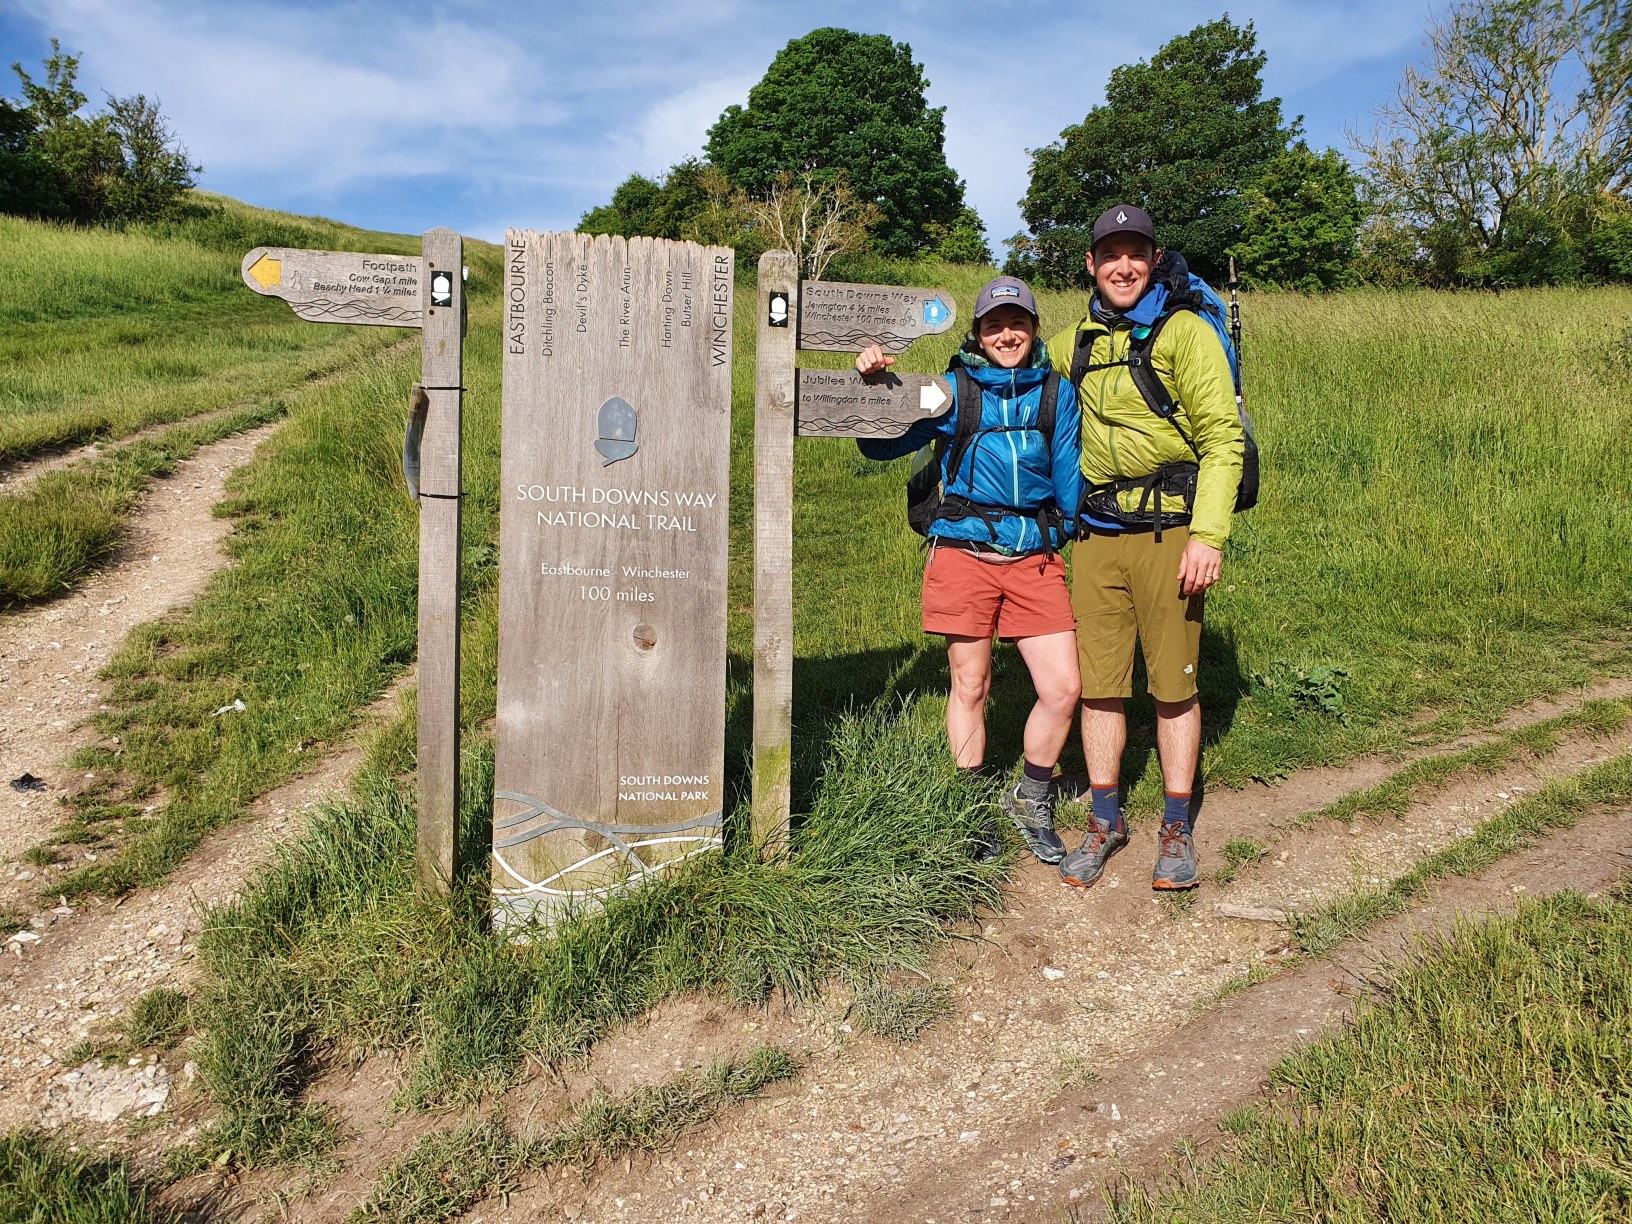 The South Downs Way picture